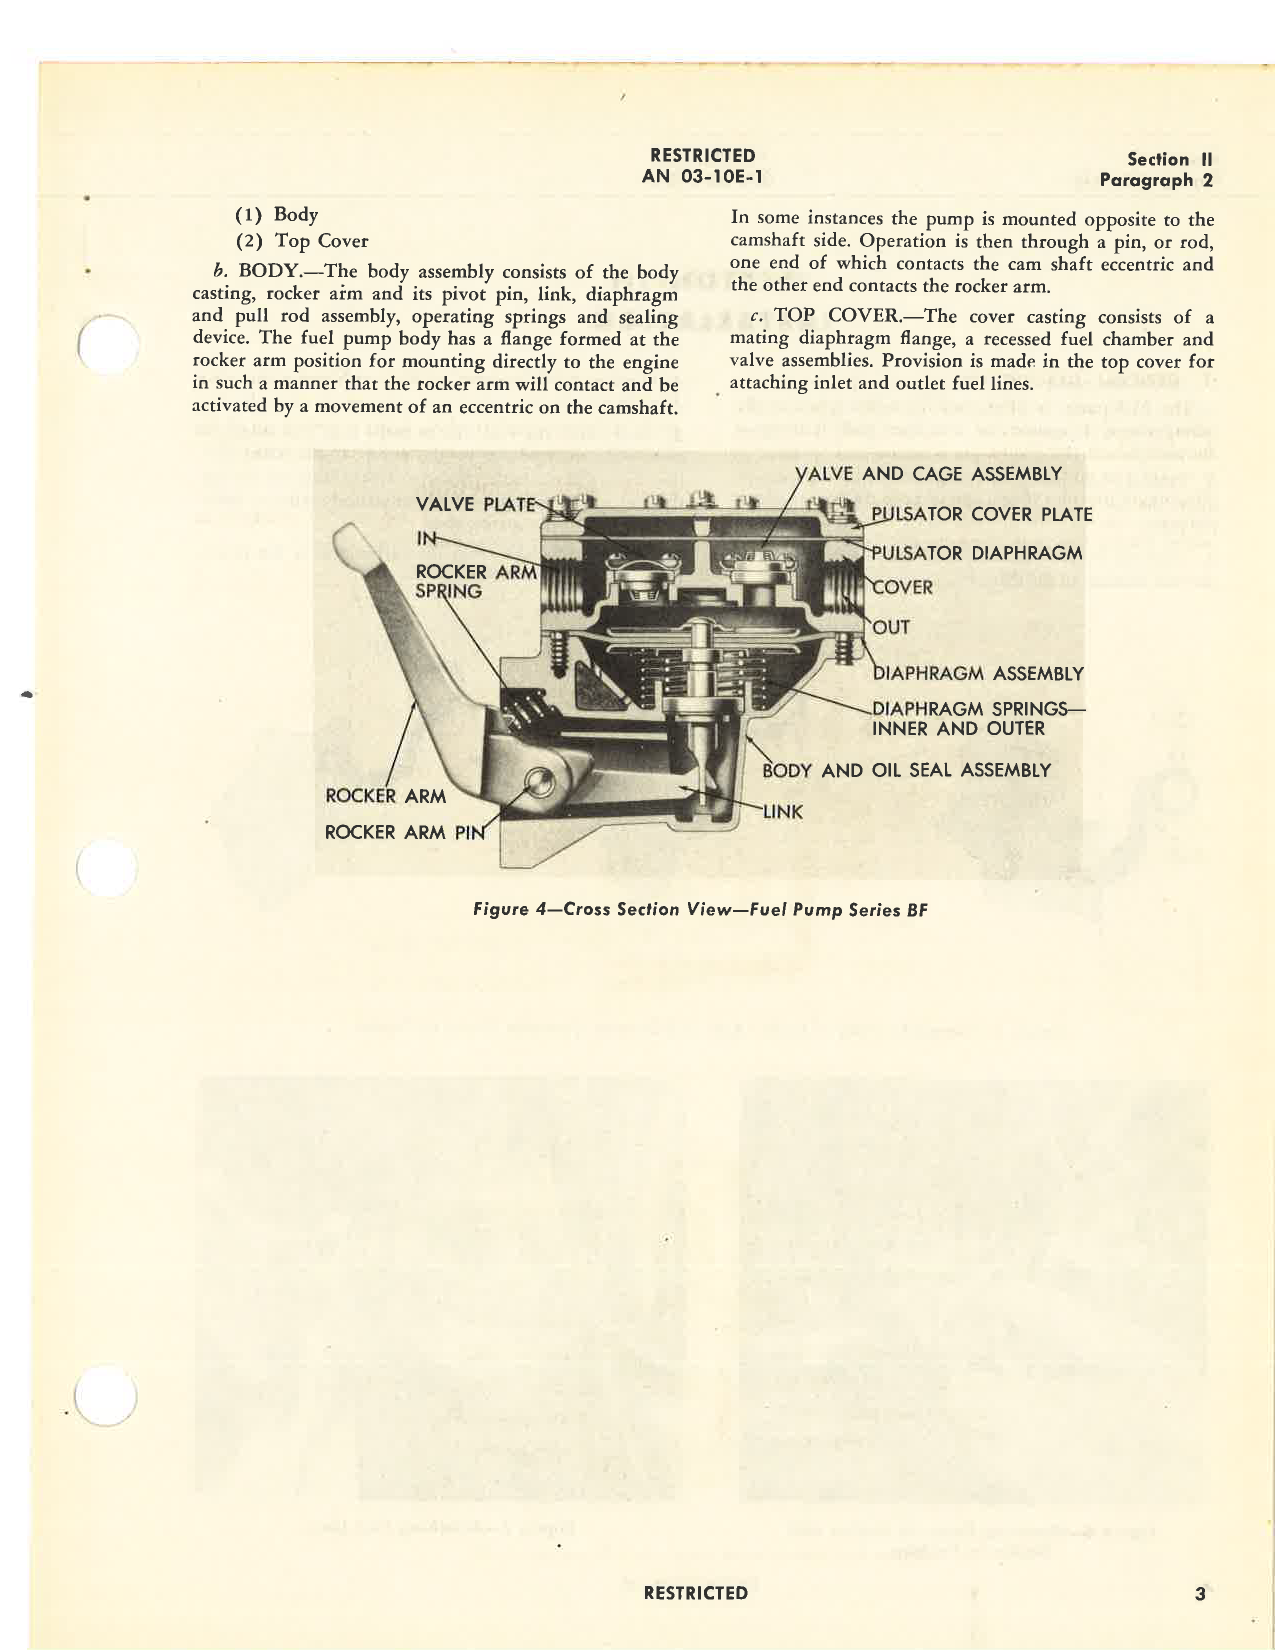 Sample page 7 from AirCorps Library document: Handbook of Instructions with Parts Catalog for Types AC, BF, and R Fuel Pumps